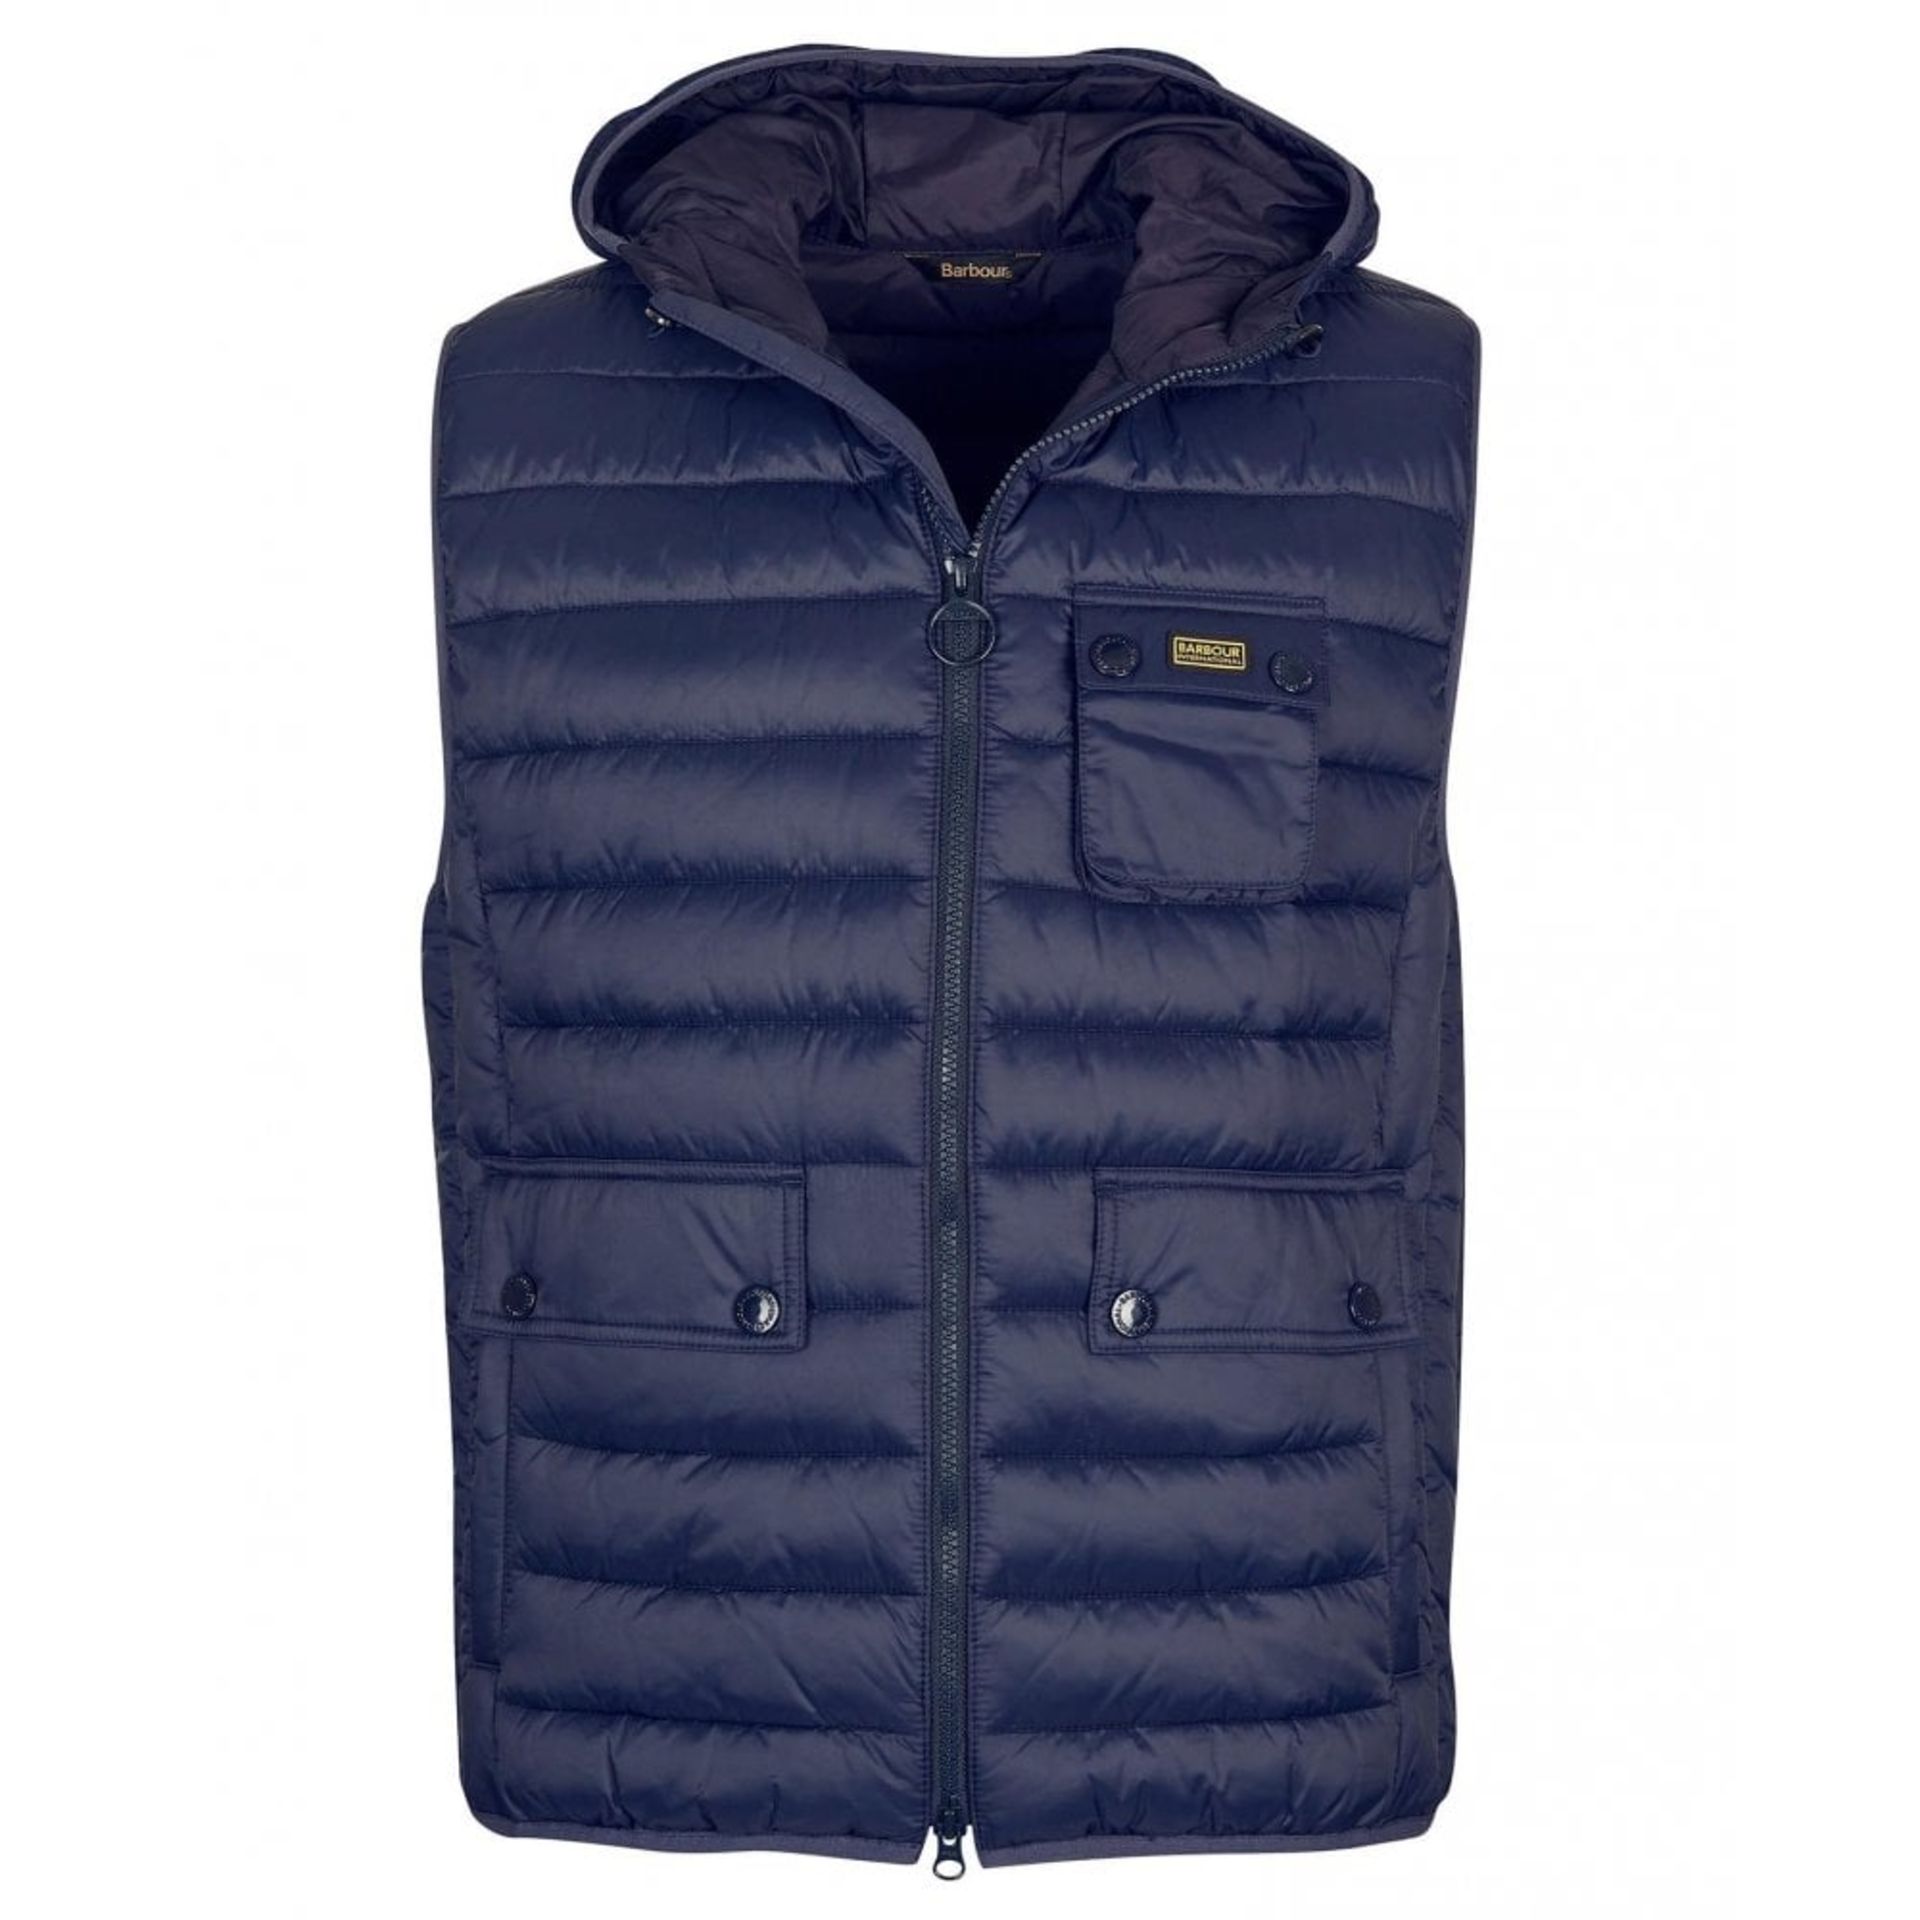 BRAND NEW BARBOUR INTL OUSTON GILET NAVY SIZE XL RRP £150 - 1